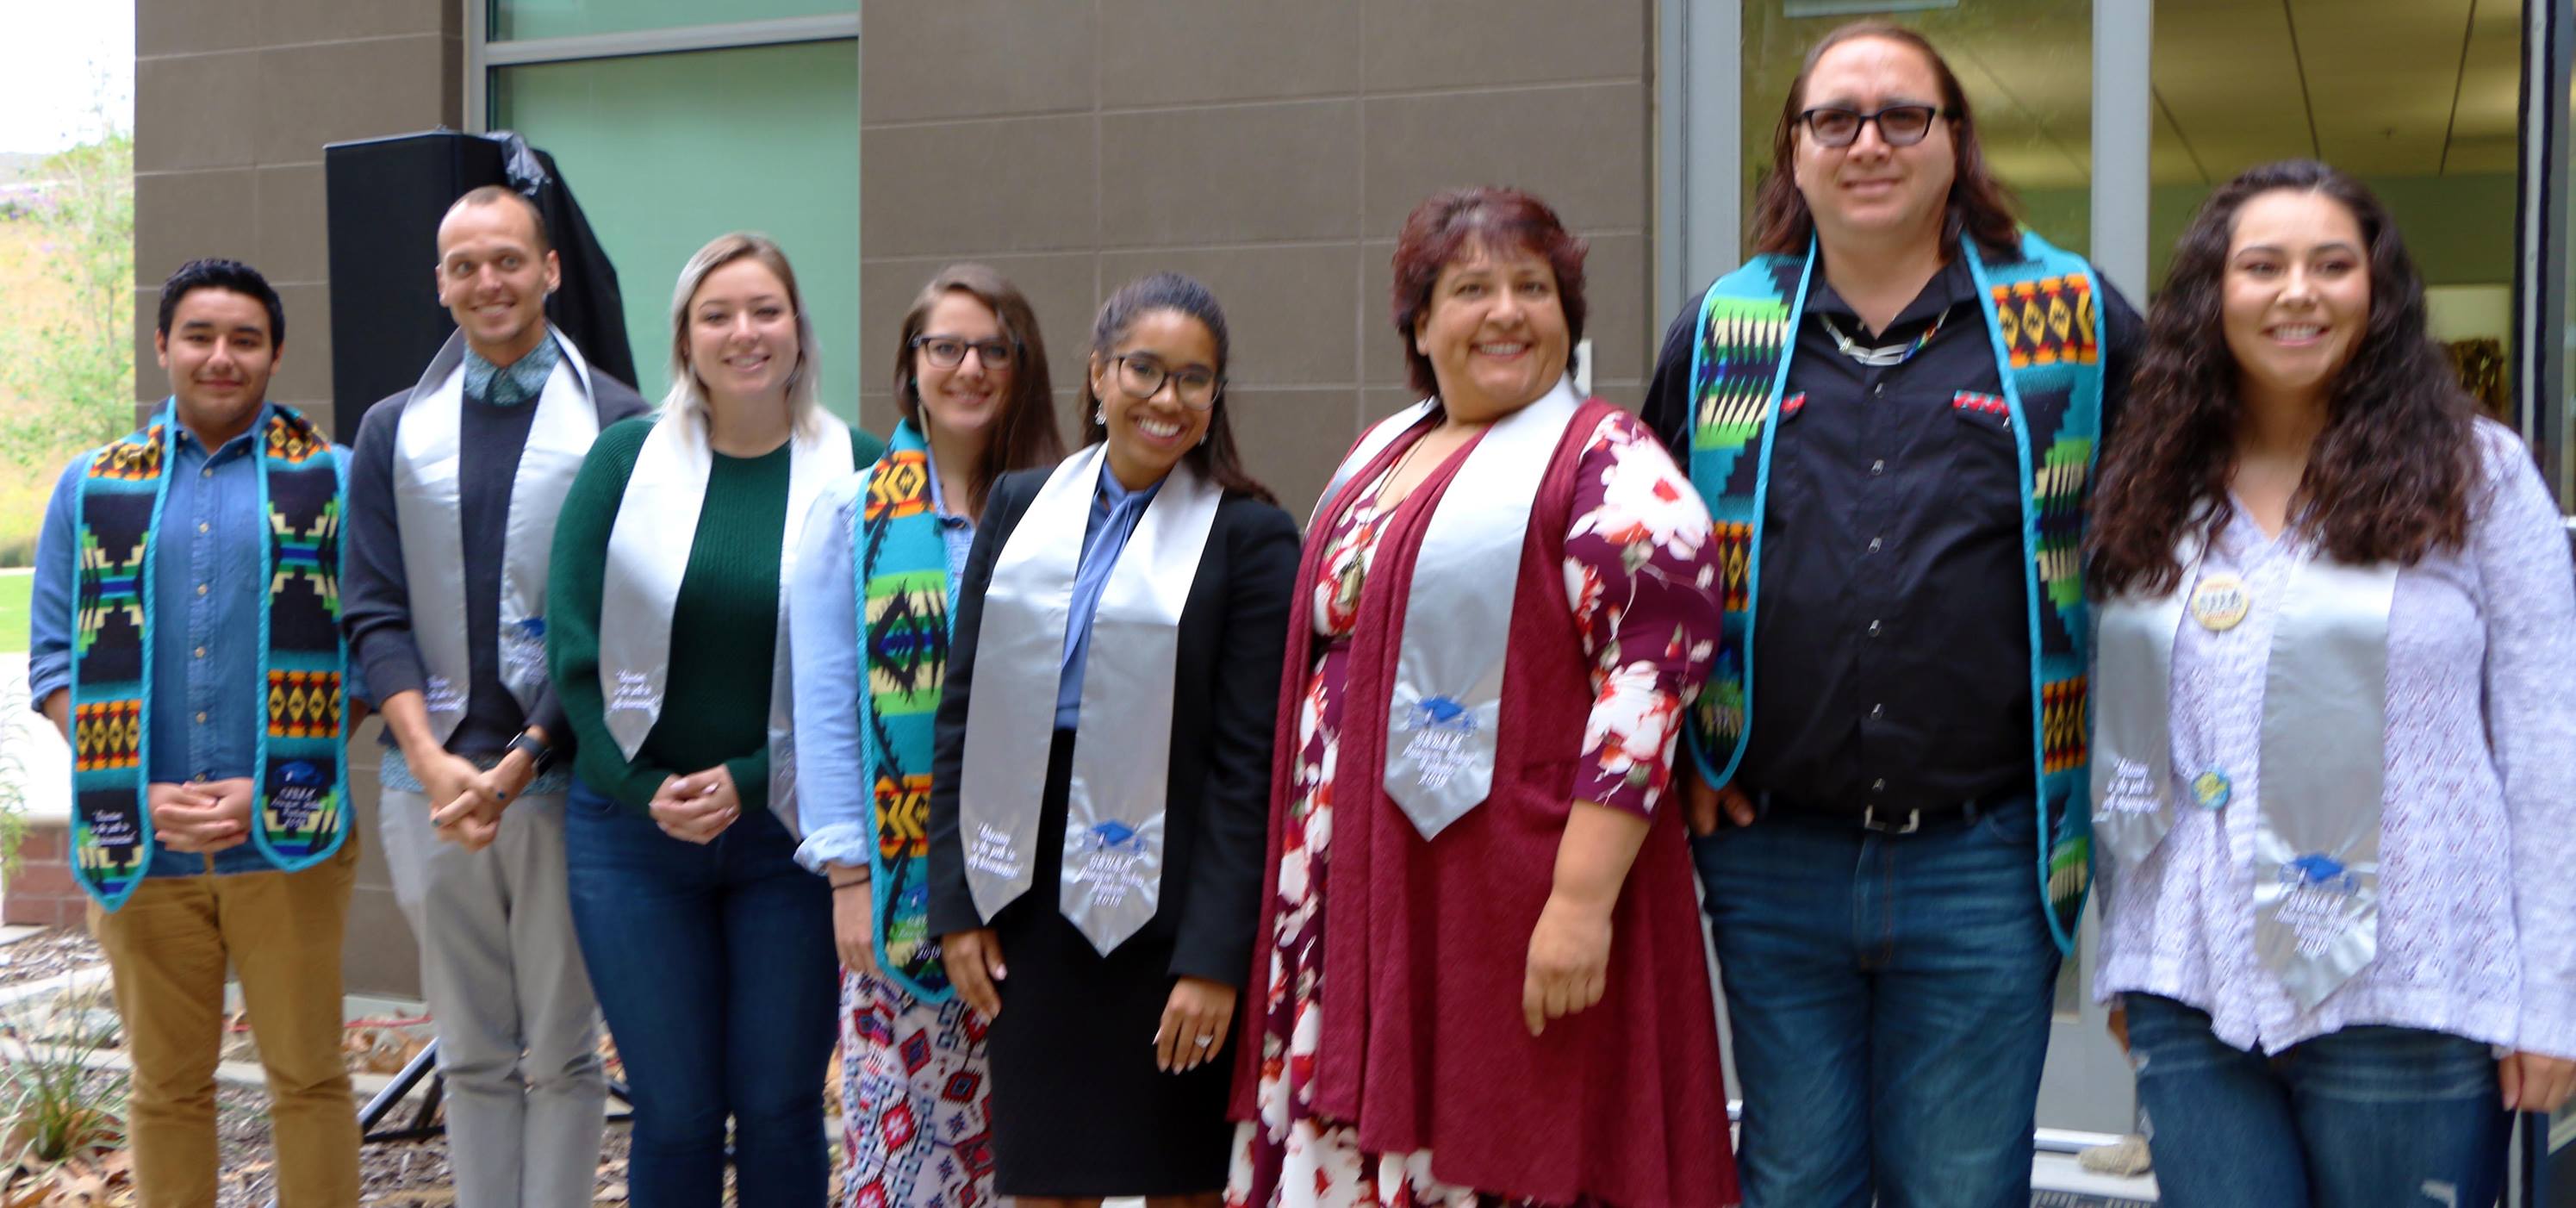 Group of American Indian graduates standing in a horizontal line wearing graduation stoles over their clothes, smiling at the camera